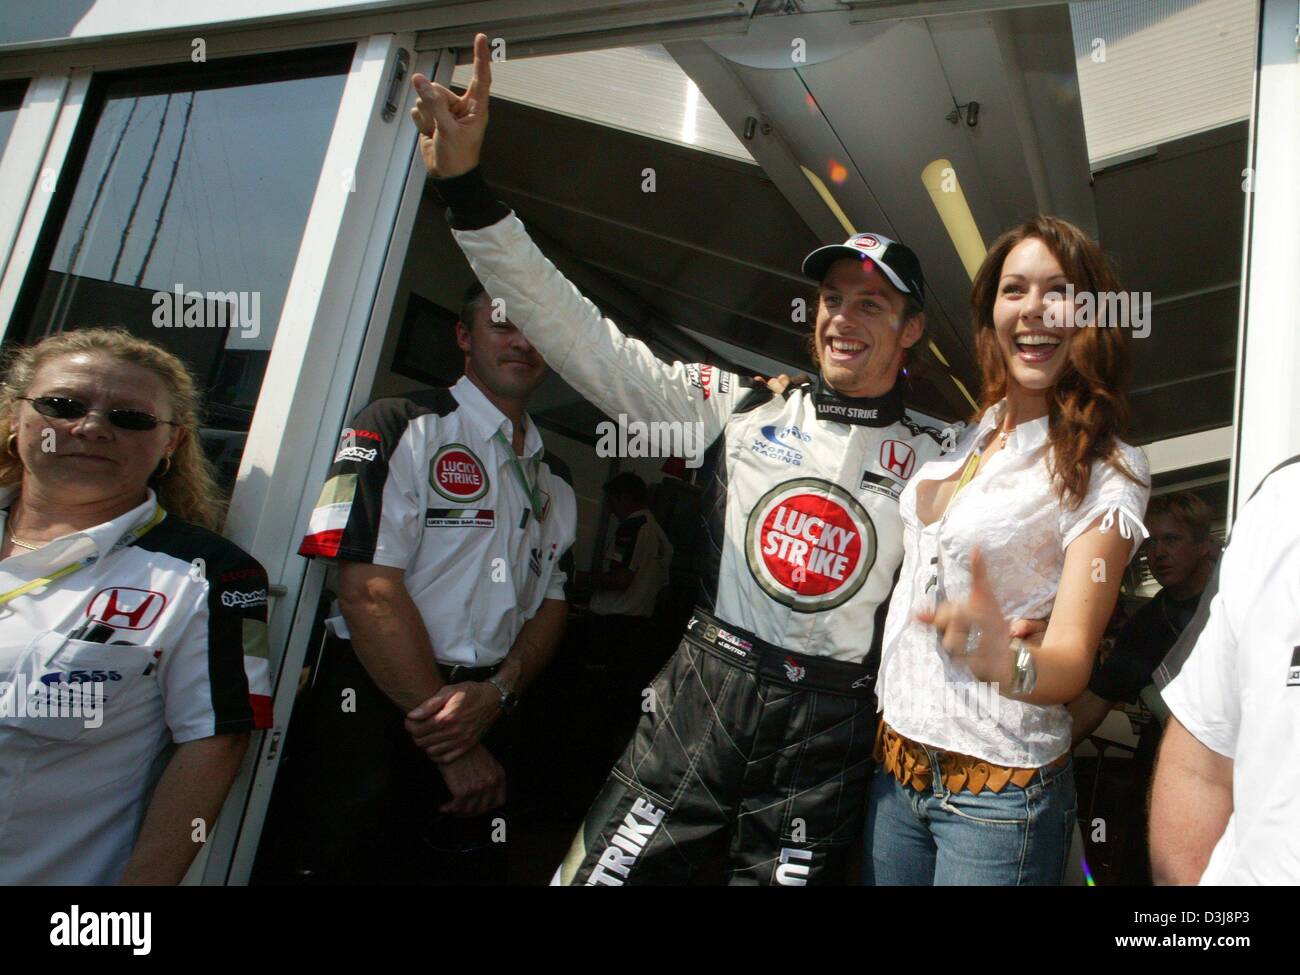 (dpa) - English Formula One pilot Jenson Button (Team BAR-Honda) smiles and celebrates with his girlfriend Louise Griffiths (R) after winning his first ever pole position at the San Marino Grand Prix in Imola, Italy, 24 April 2004. He would finish the race in second place a day later. Stock Photo